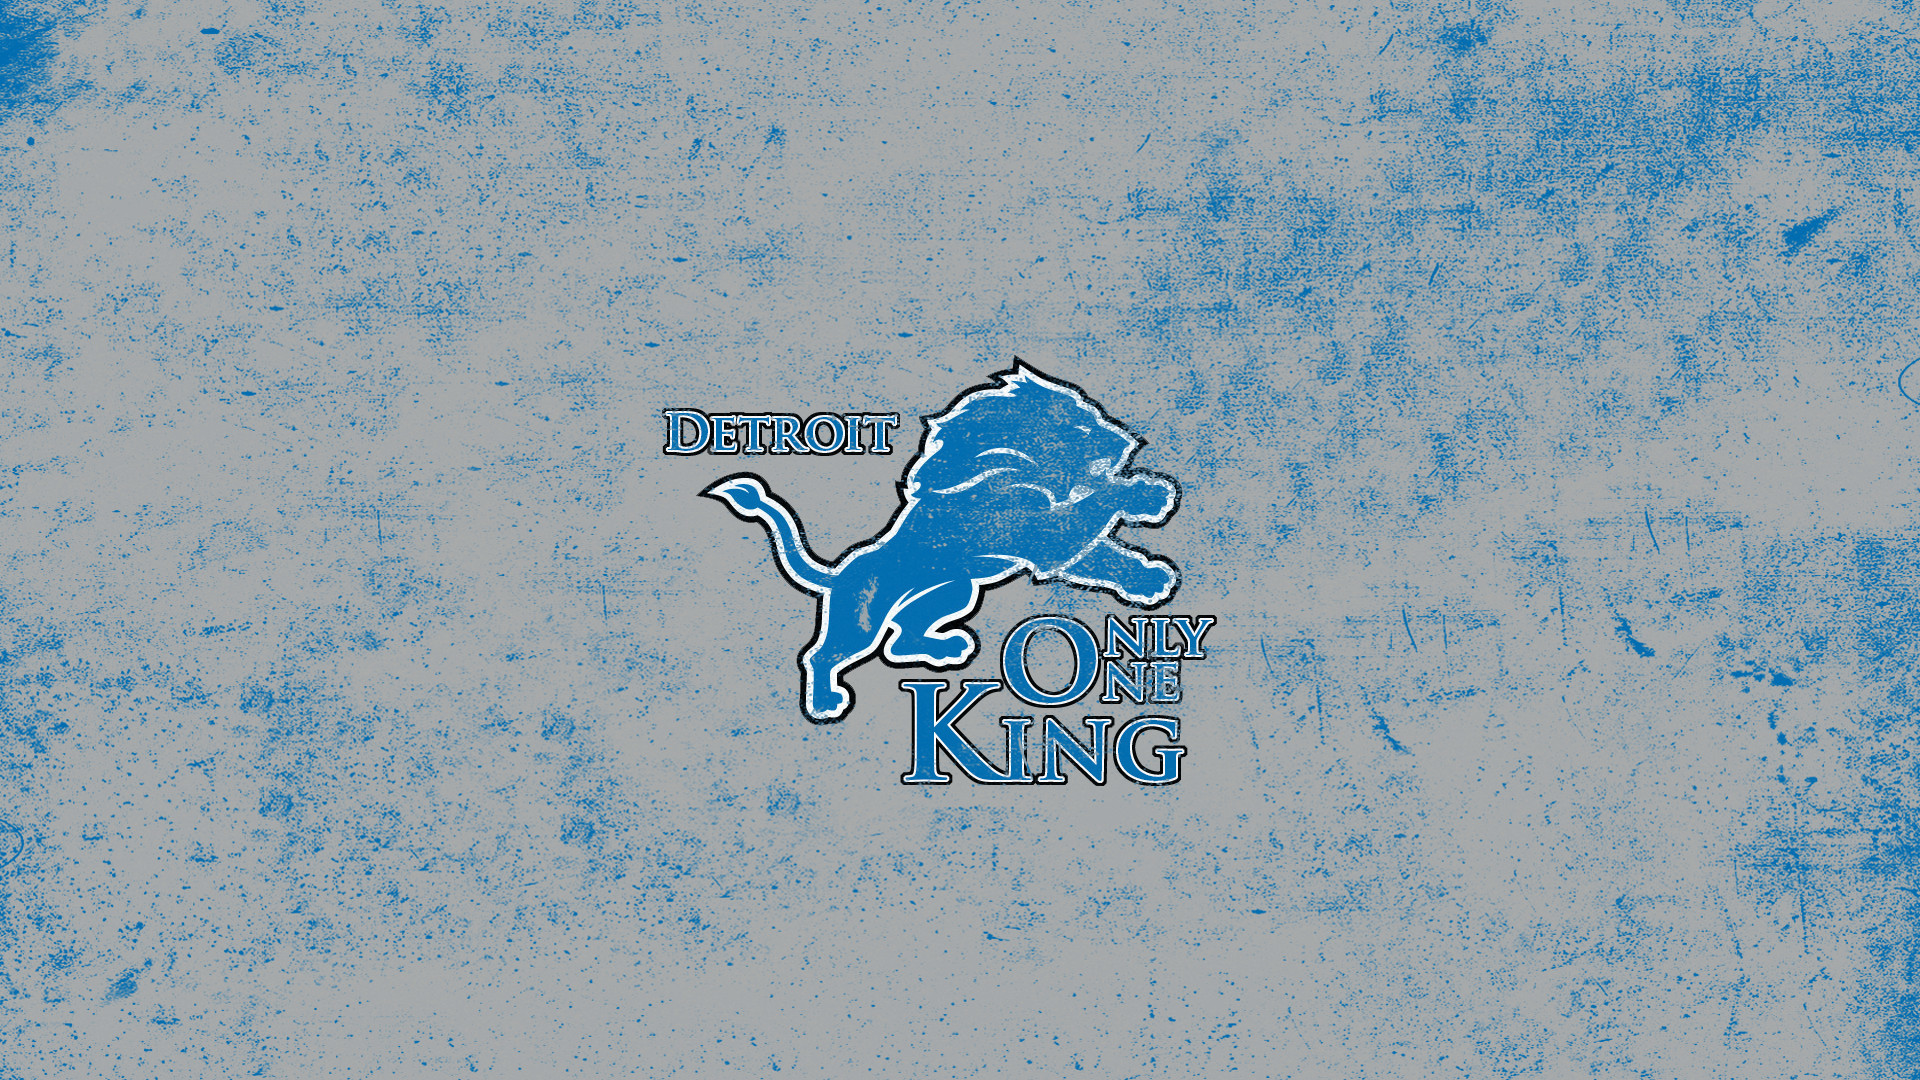 1920x1080 Search Results for “detroit lions wallpaper 2015 hd” – Adorable Wallpapers